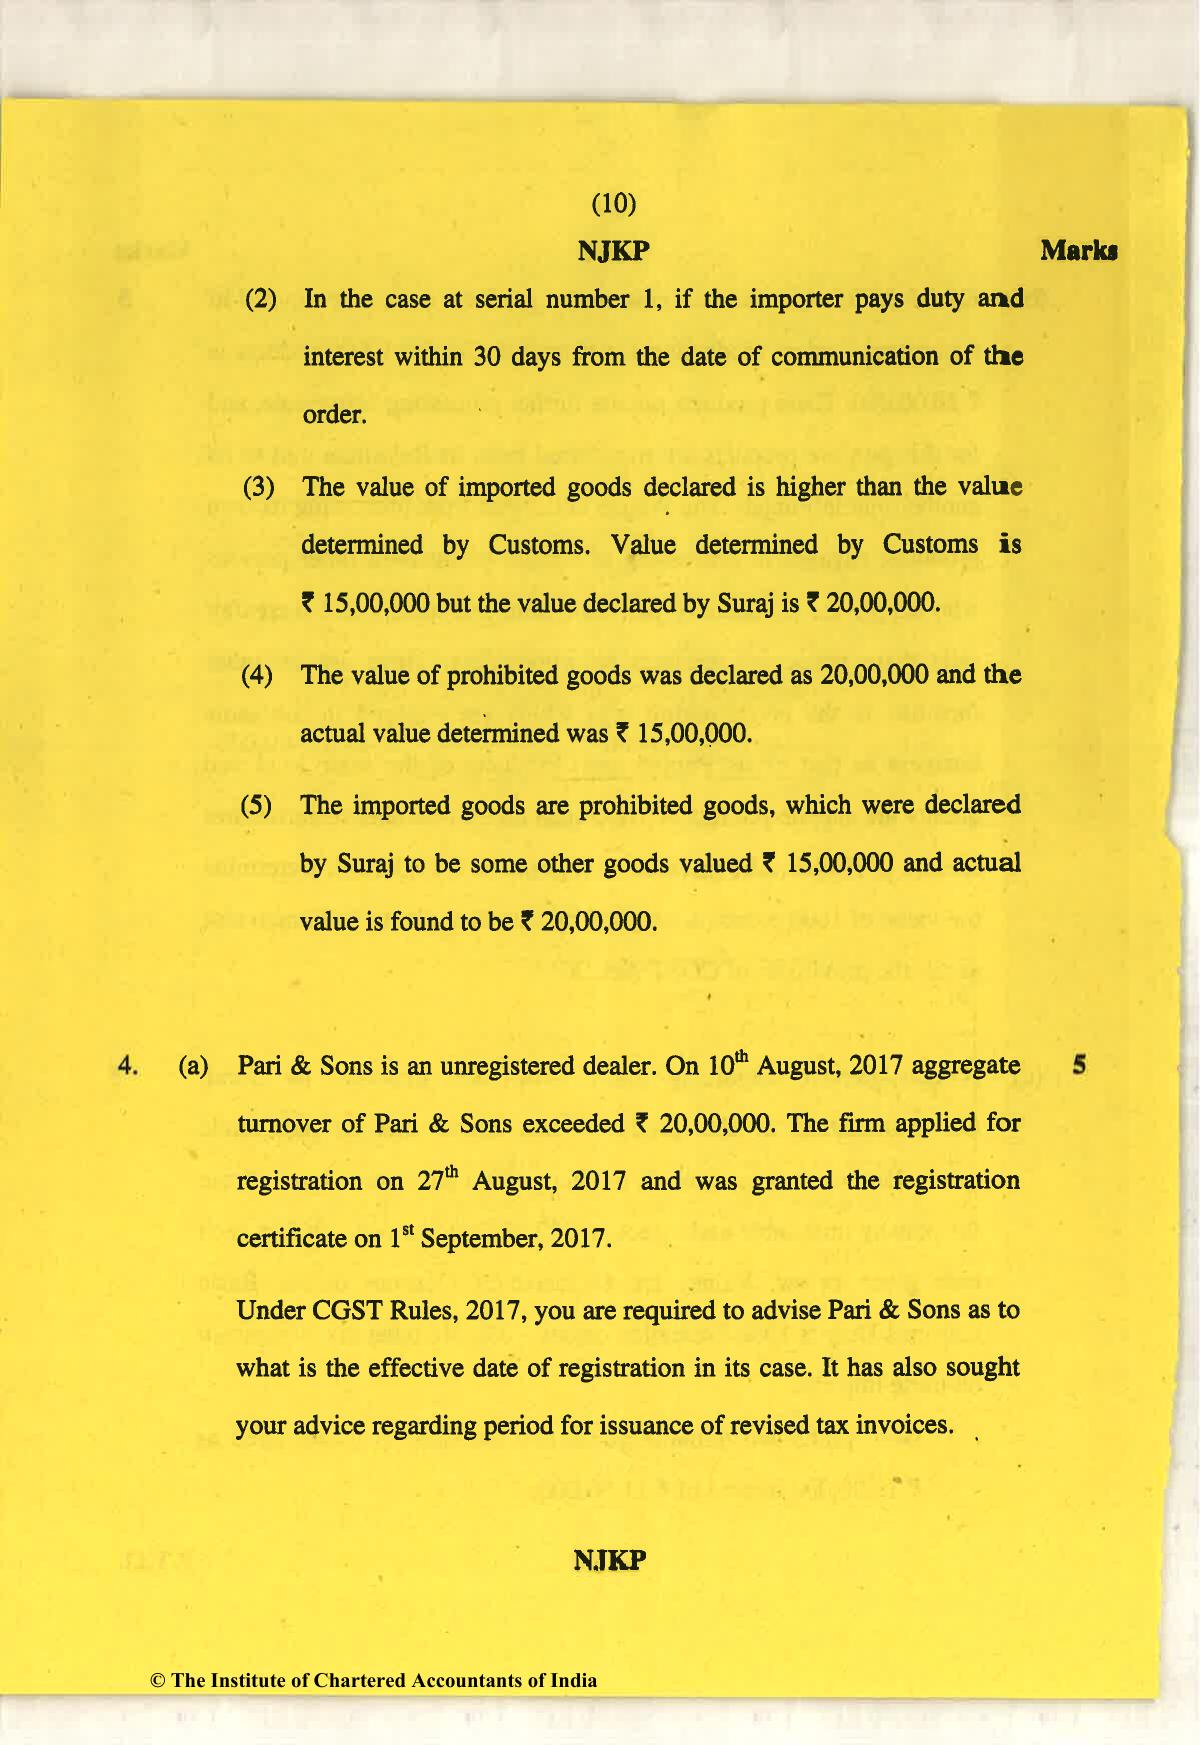 CA Final May 2018 Question Paper - Paper 8 – Indirect Tax Laws - Page 10